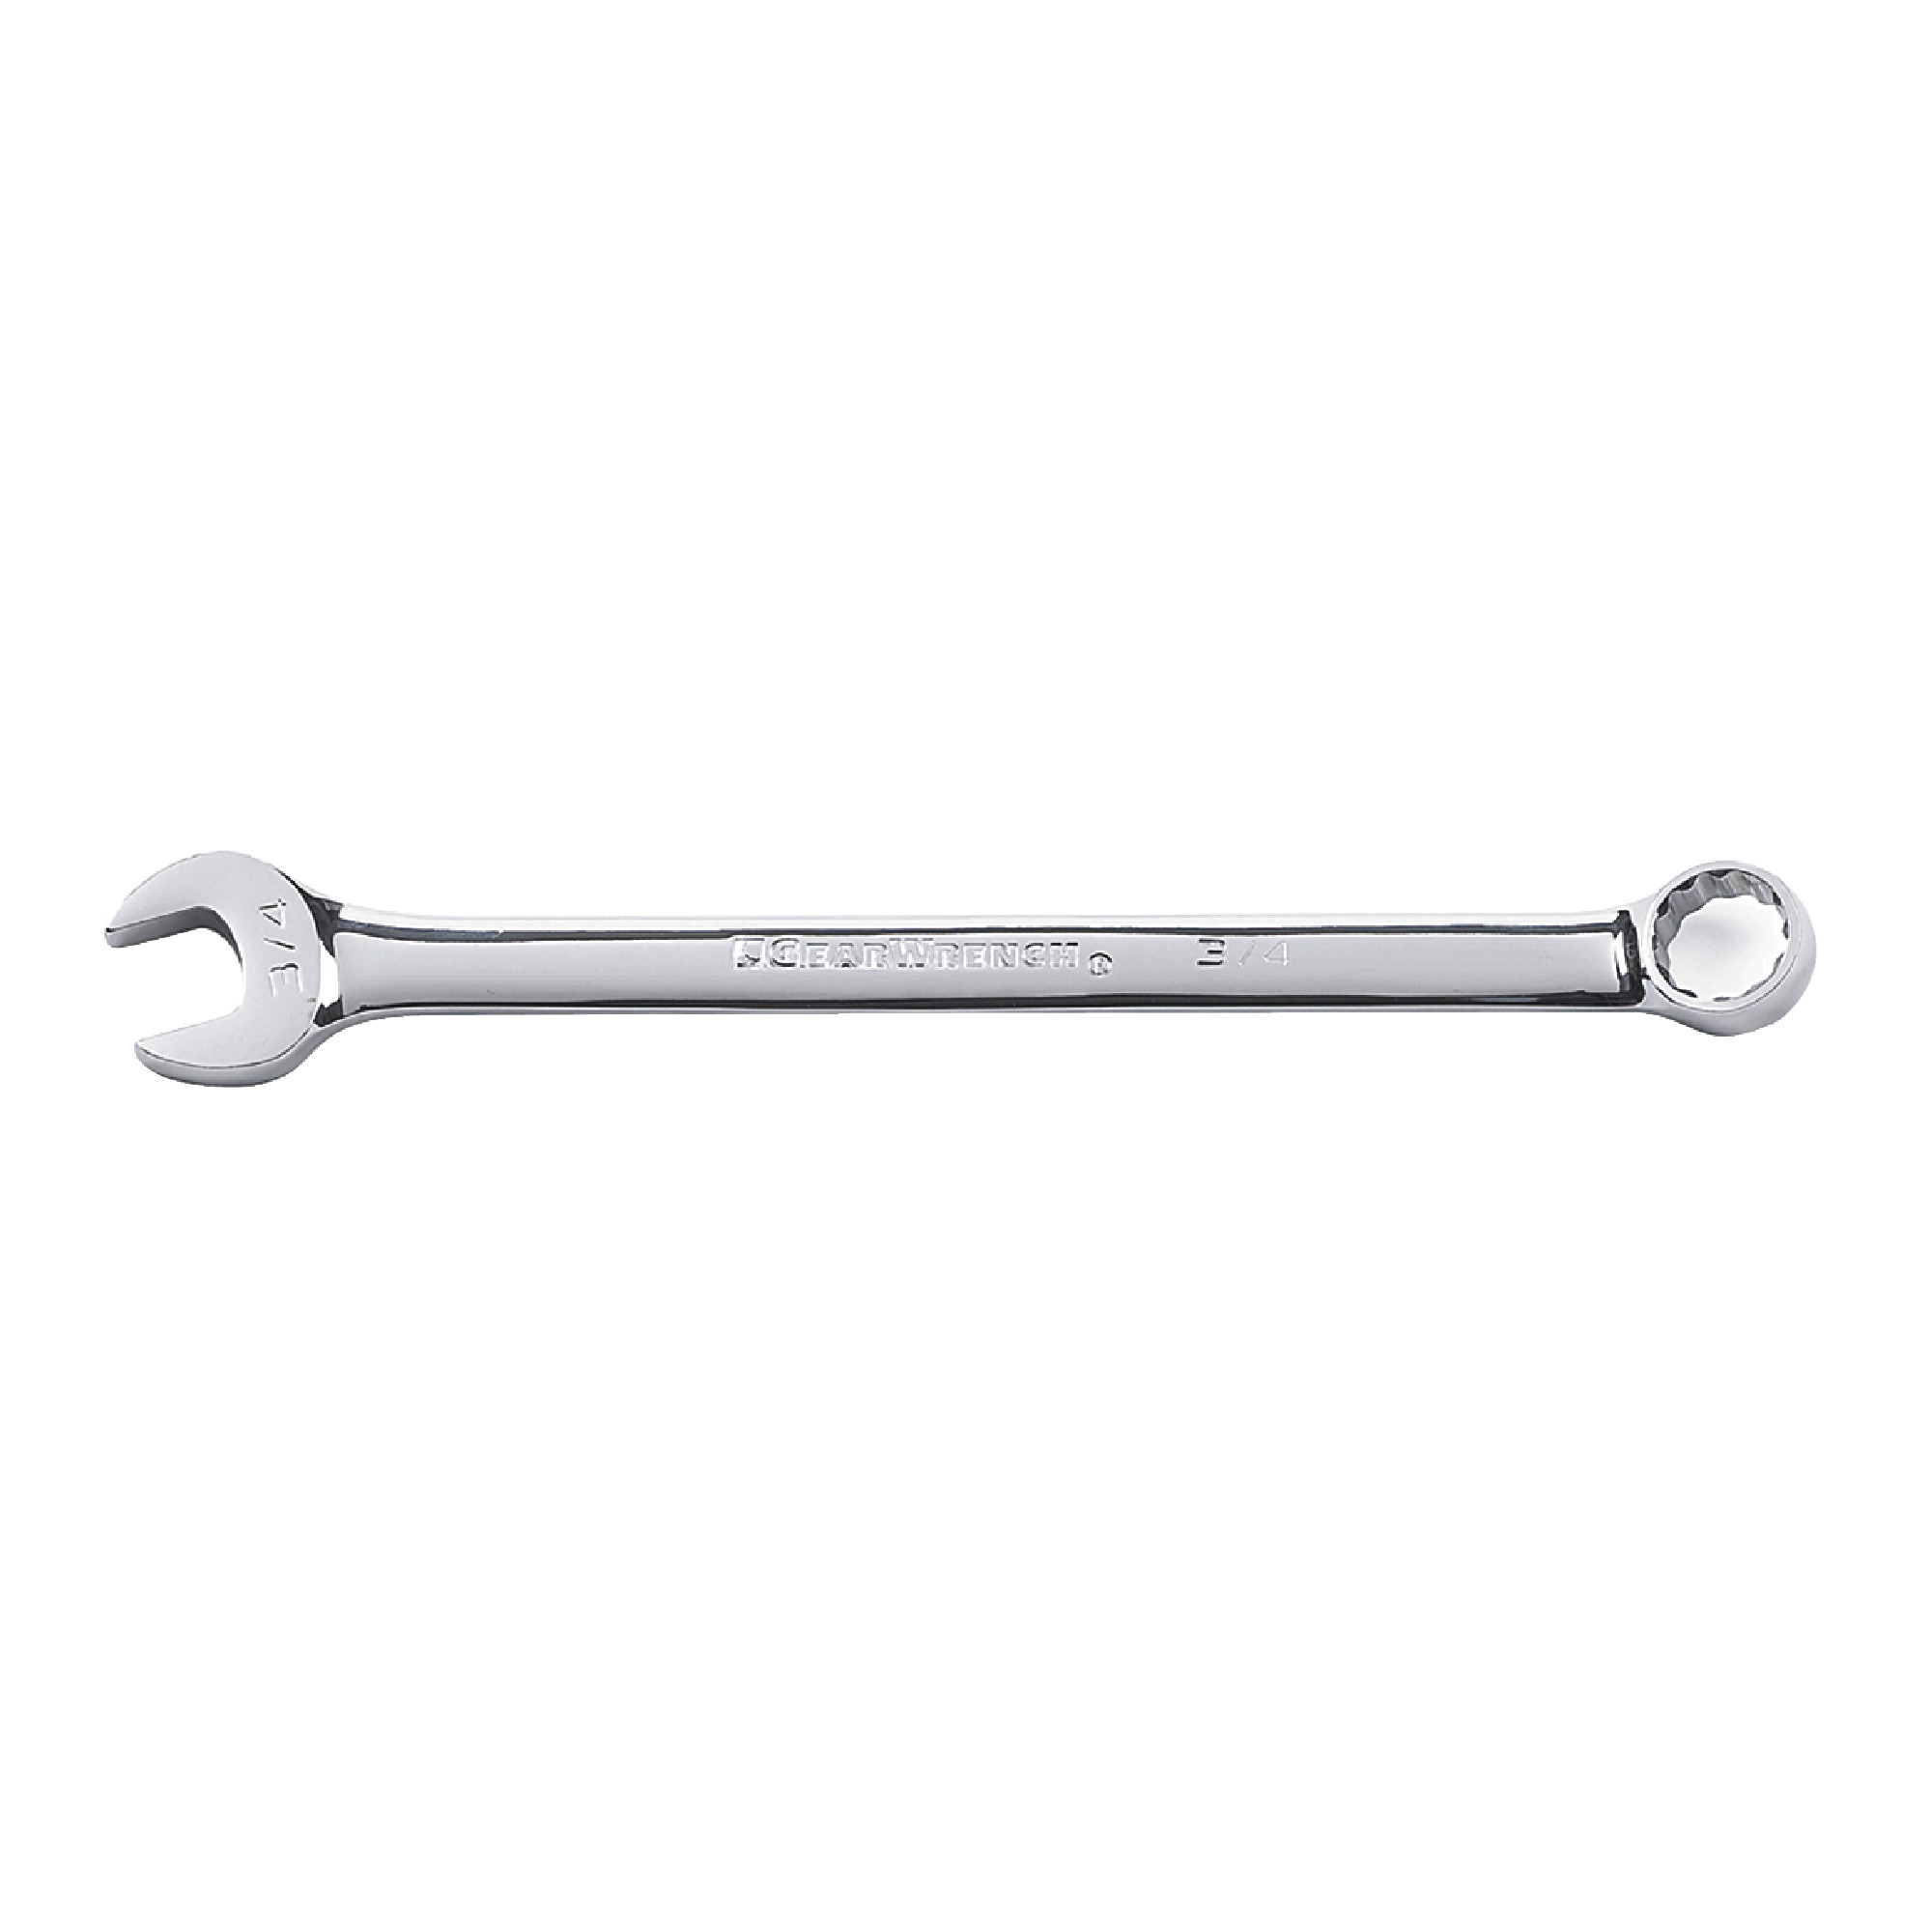 1-1/4" 12 Point Long Pattern Combination Wrench